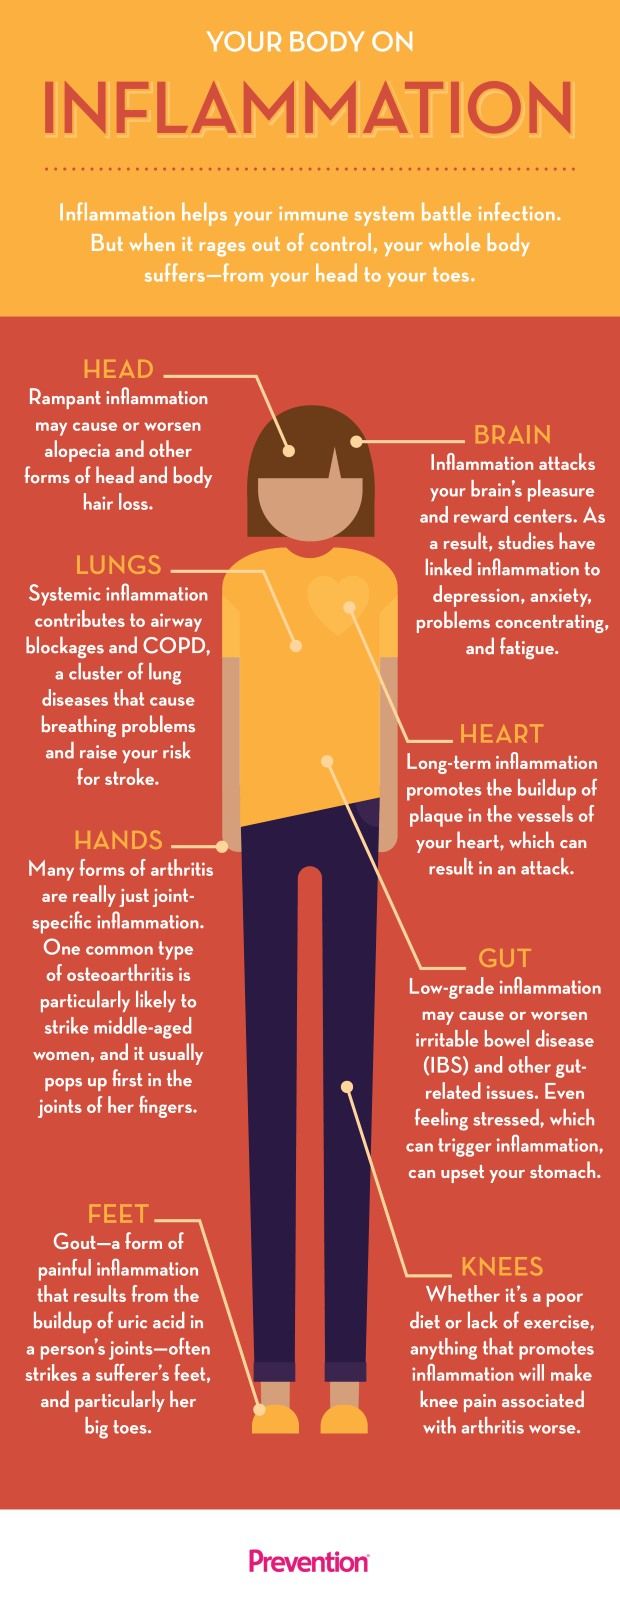 Your Body On Inflammation infographic